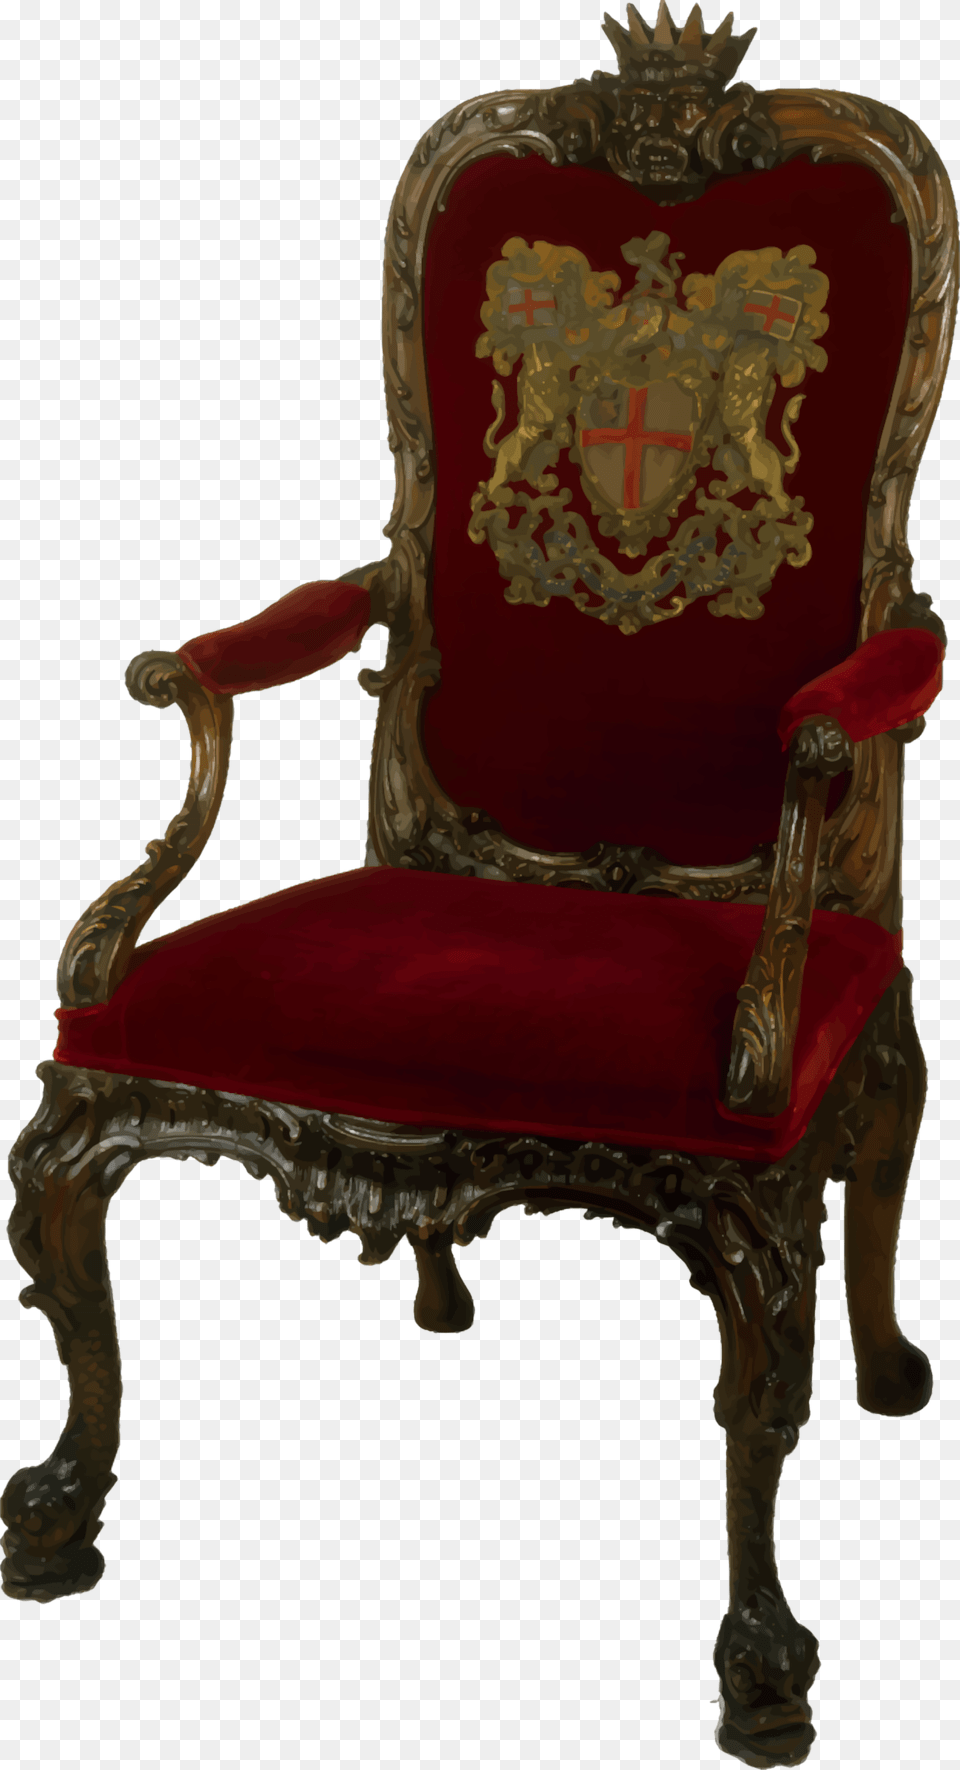 Ornate Walnut Chair Icons, Furniture, Throne, Armchair Free Transparent Png